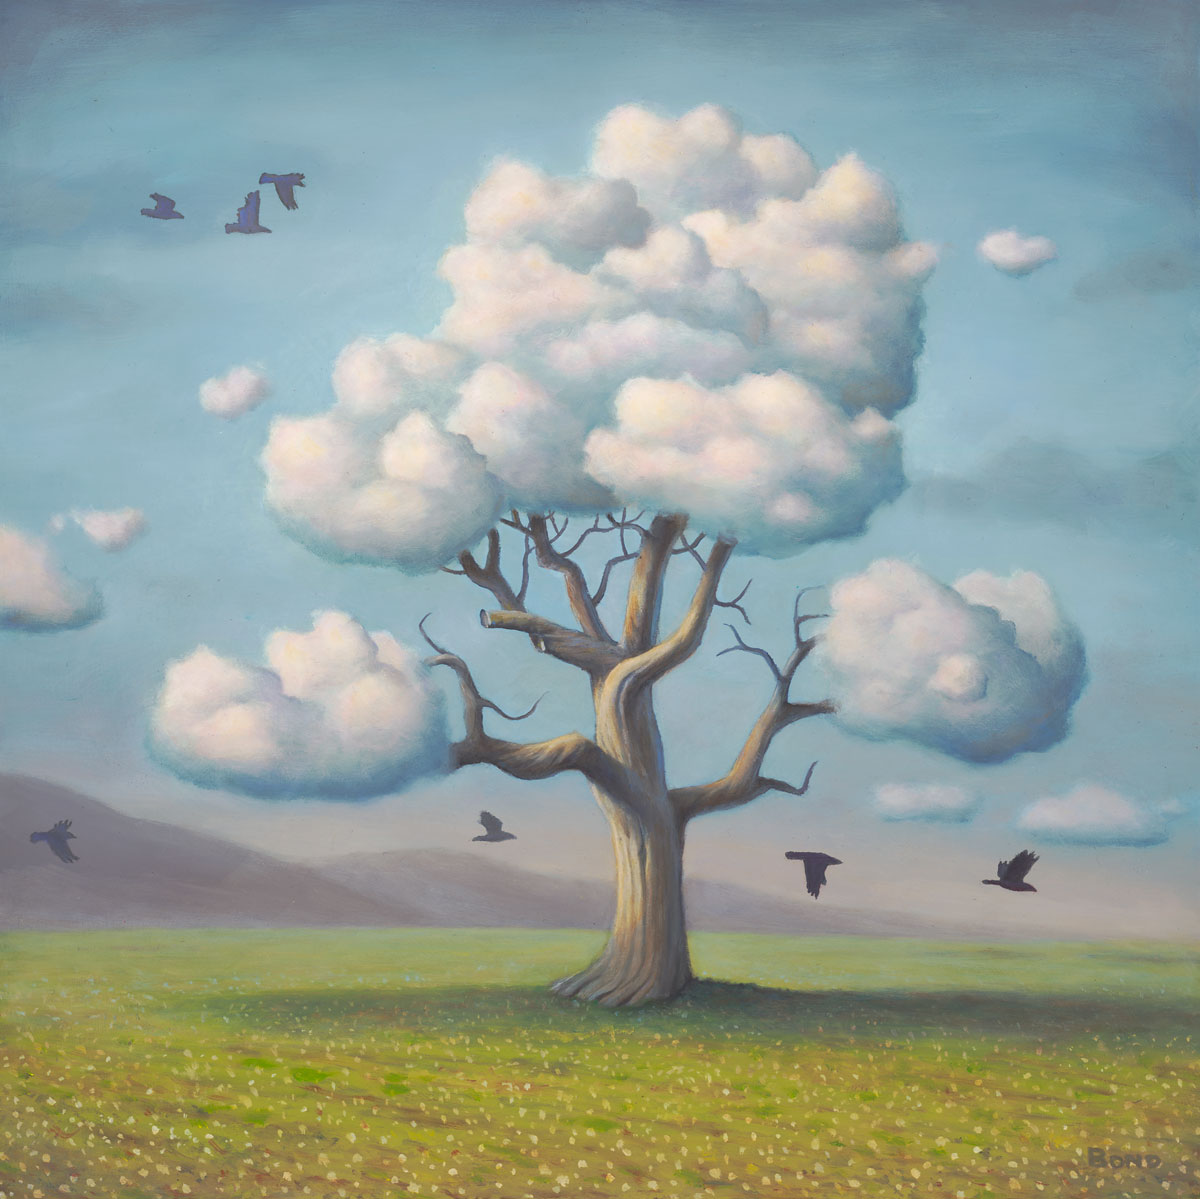 A Conspiracy of Nature, painting of a tree with cloud branches and birds flying around,  art includes sky, clouds, trees, flying, nature, art with raven crow, soulful uplifting inspirational art, soul stirring illusion art, romantic art,  surrealism, surreal art, dreamlike imagery, fanciful art, fantasy art, dreamscape visual, metaphysical art, spiritual painting, metaphysical painting, spiritual art, whimsical art, whimsy art, dream art, fantastic realism art, limited edition giclee, signed art print, fine art reproduction, original magic realism oil painting by Paul Bond